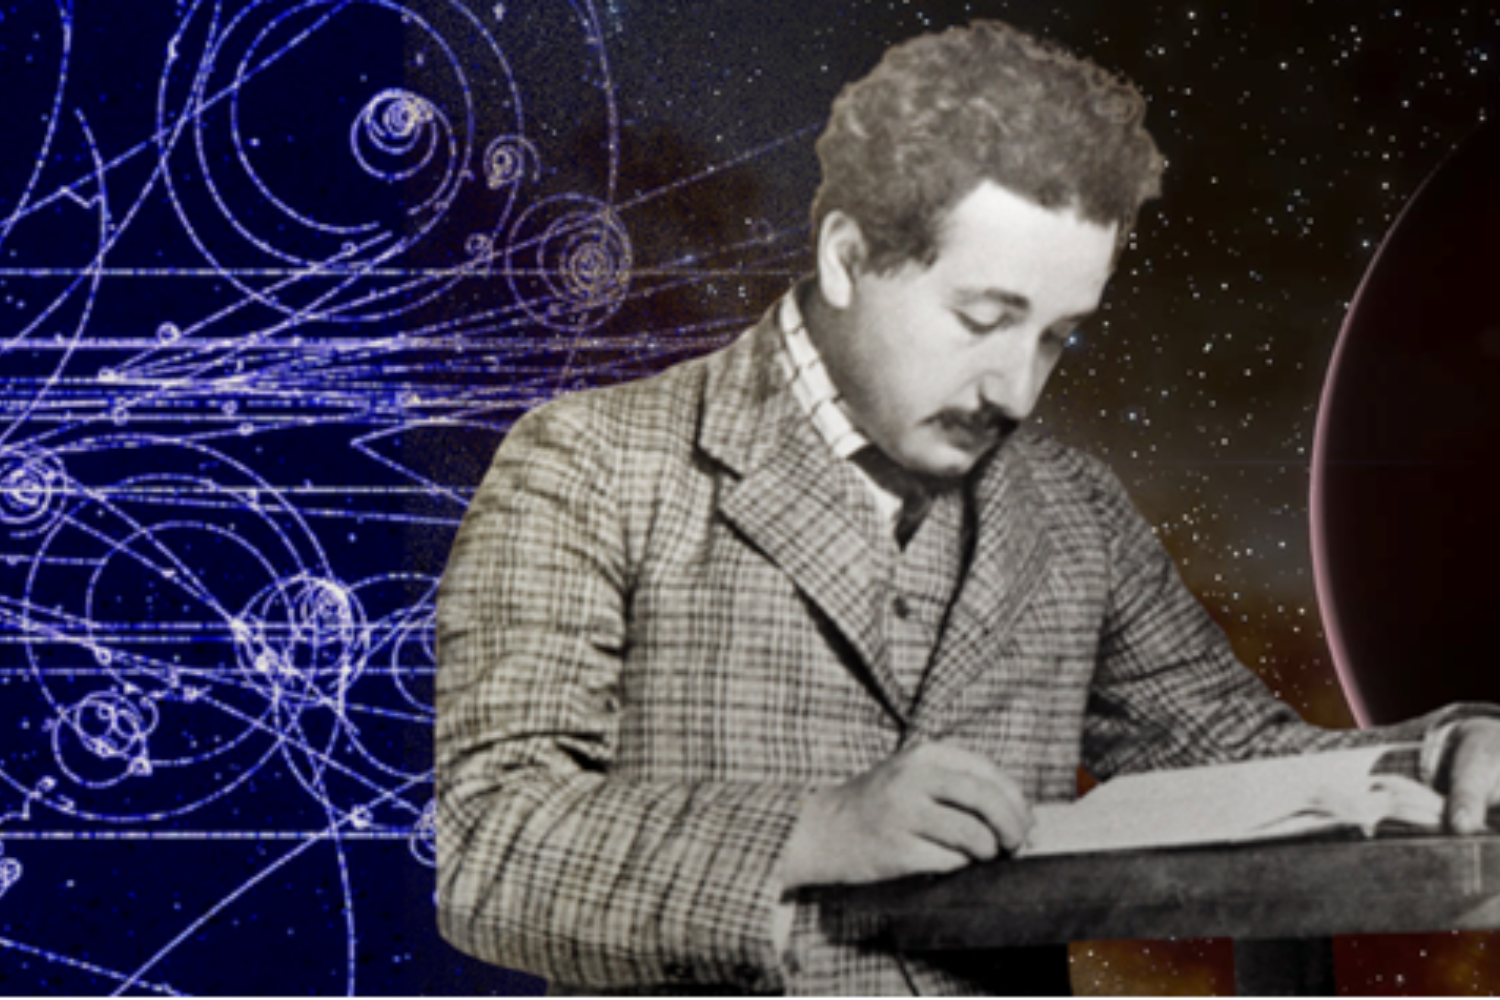 B&W picture of Einstein looking at book with particle and exoplanet background